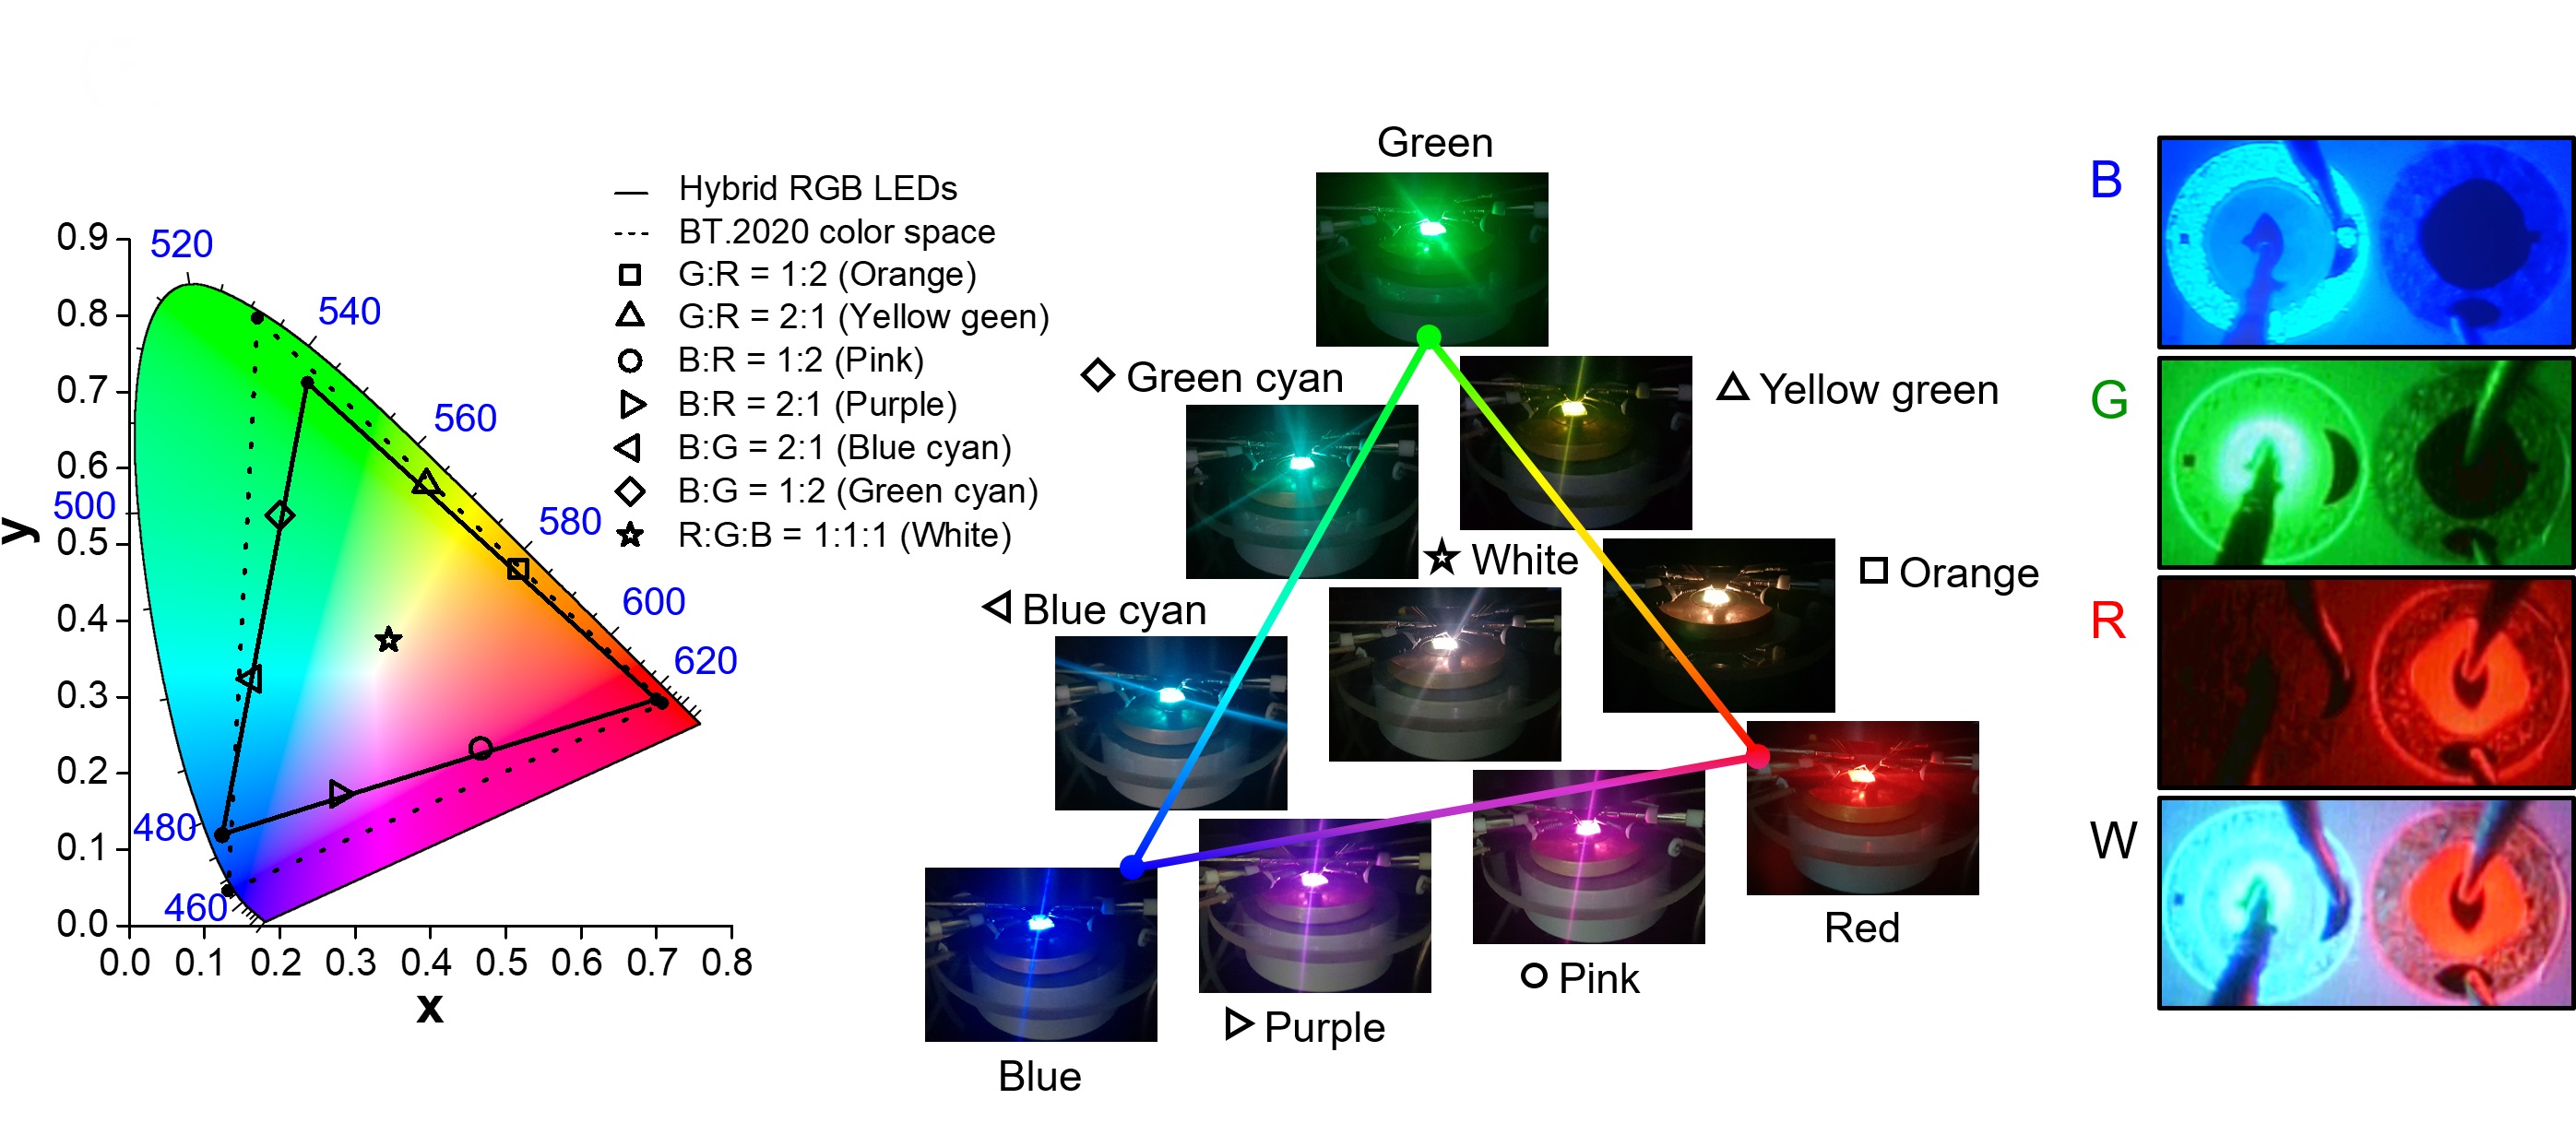 Professor Dong-Seon Lee's research team develops new micro LED technology for ultra-high resolution displays 이미지